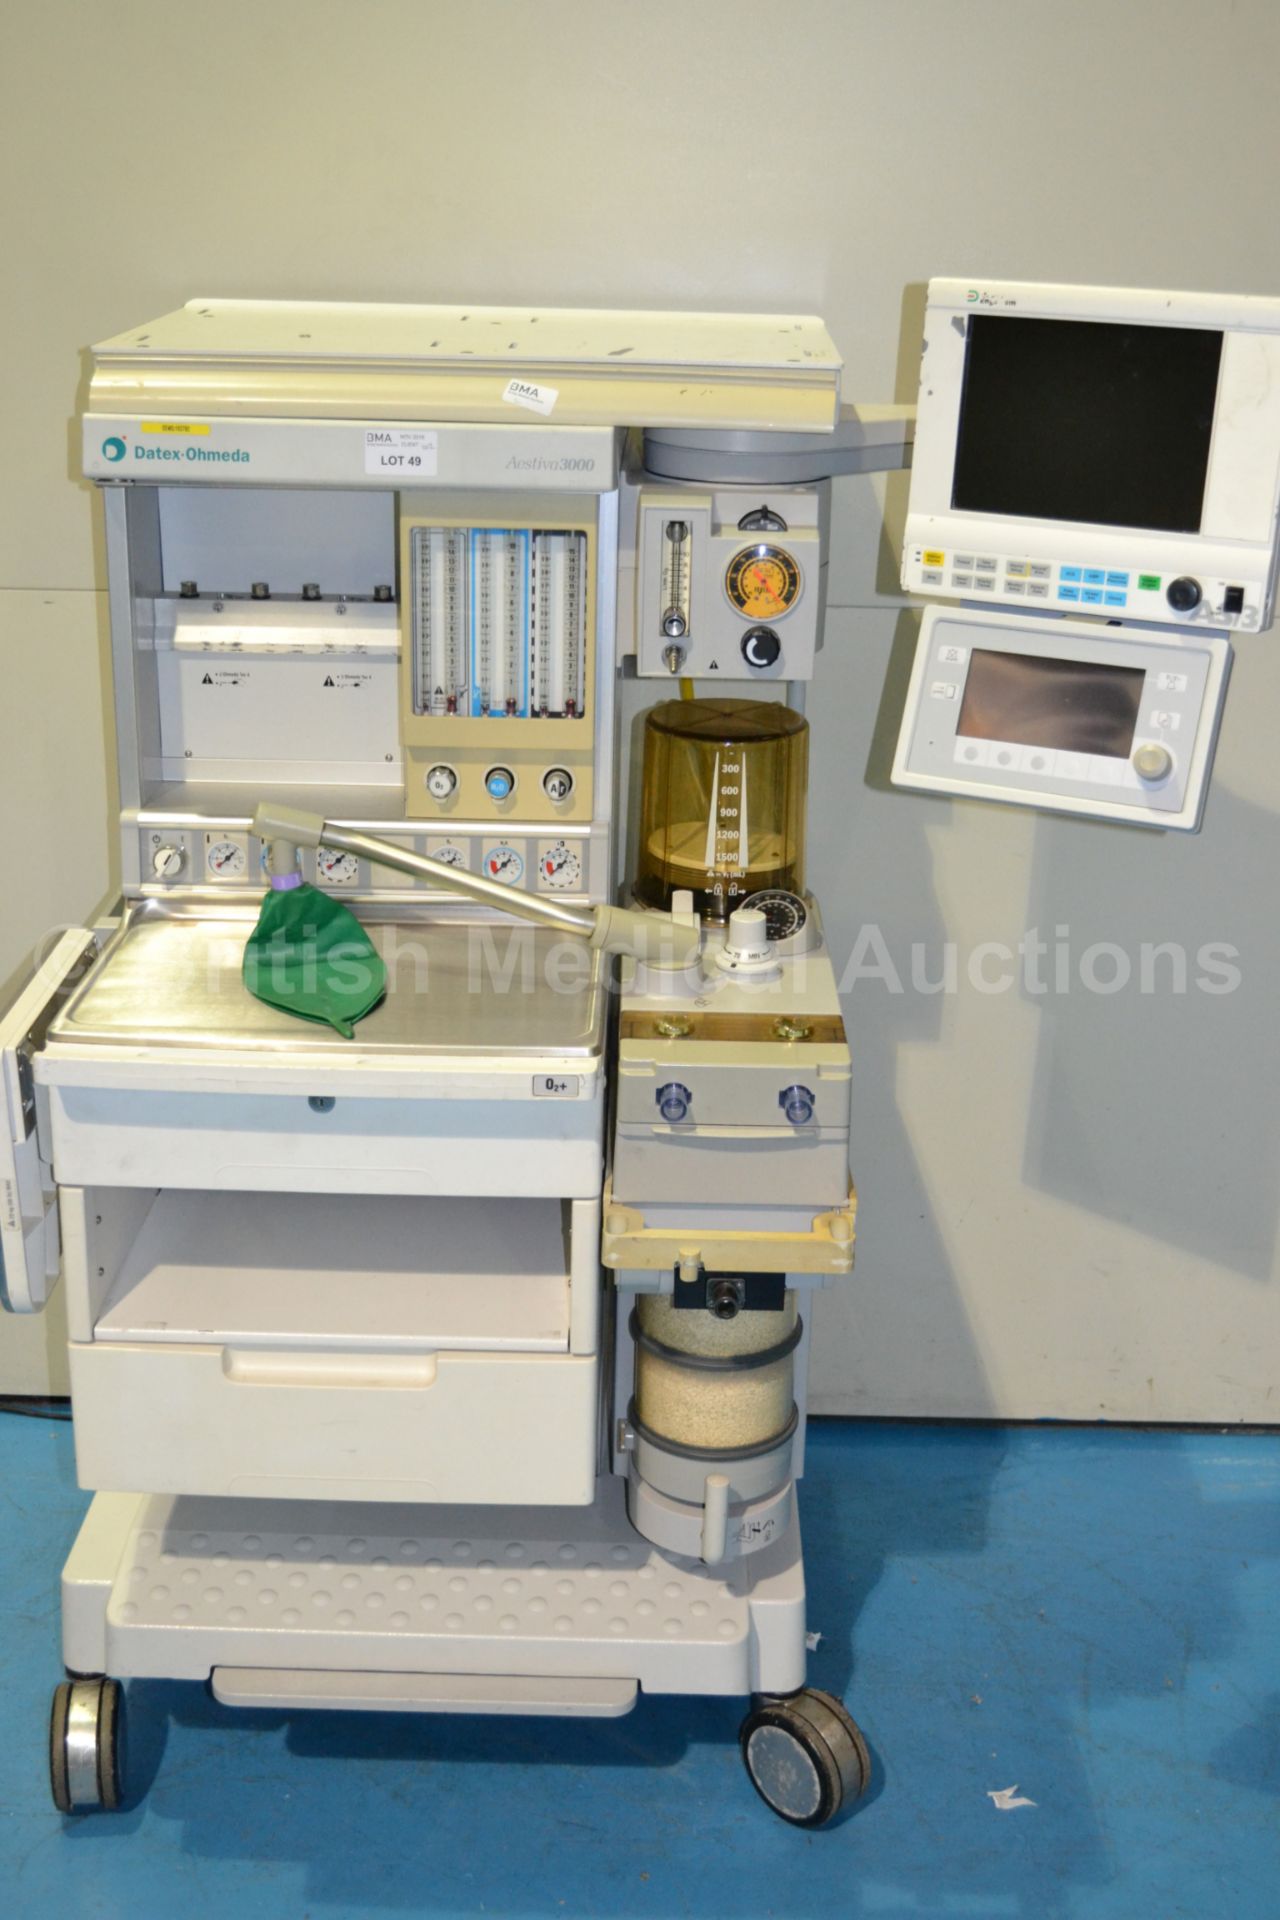 Datex Ohmeda Aestiva 3000 Anaesthesia System with